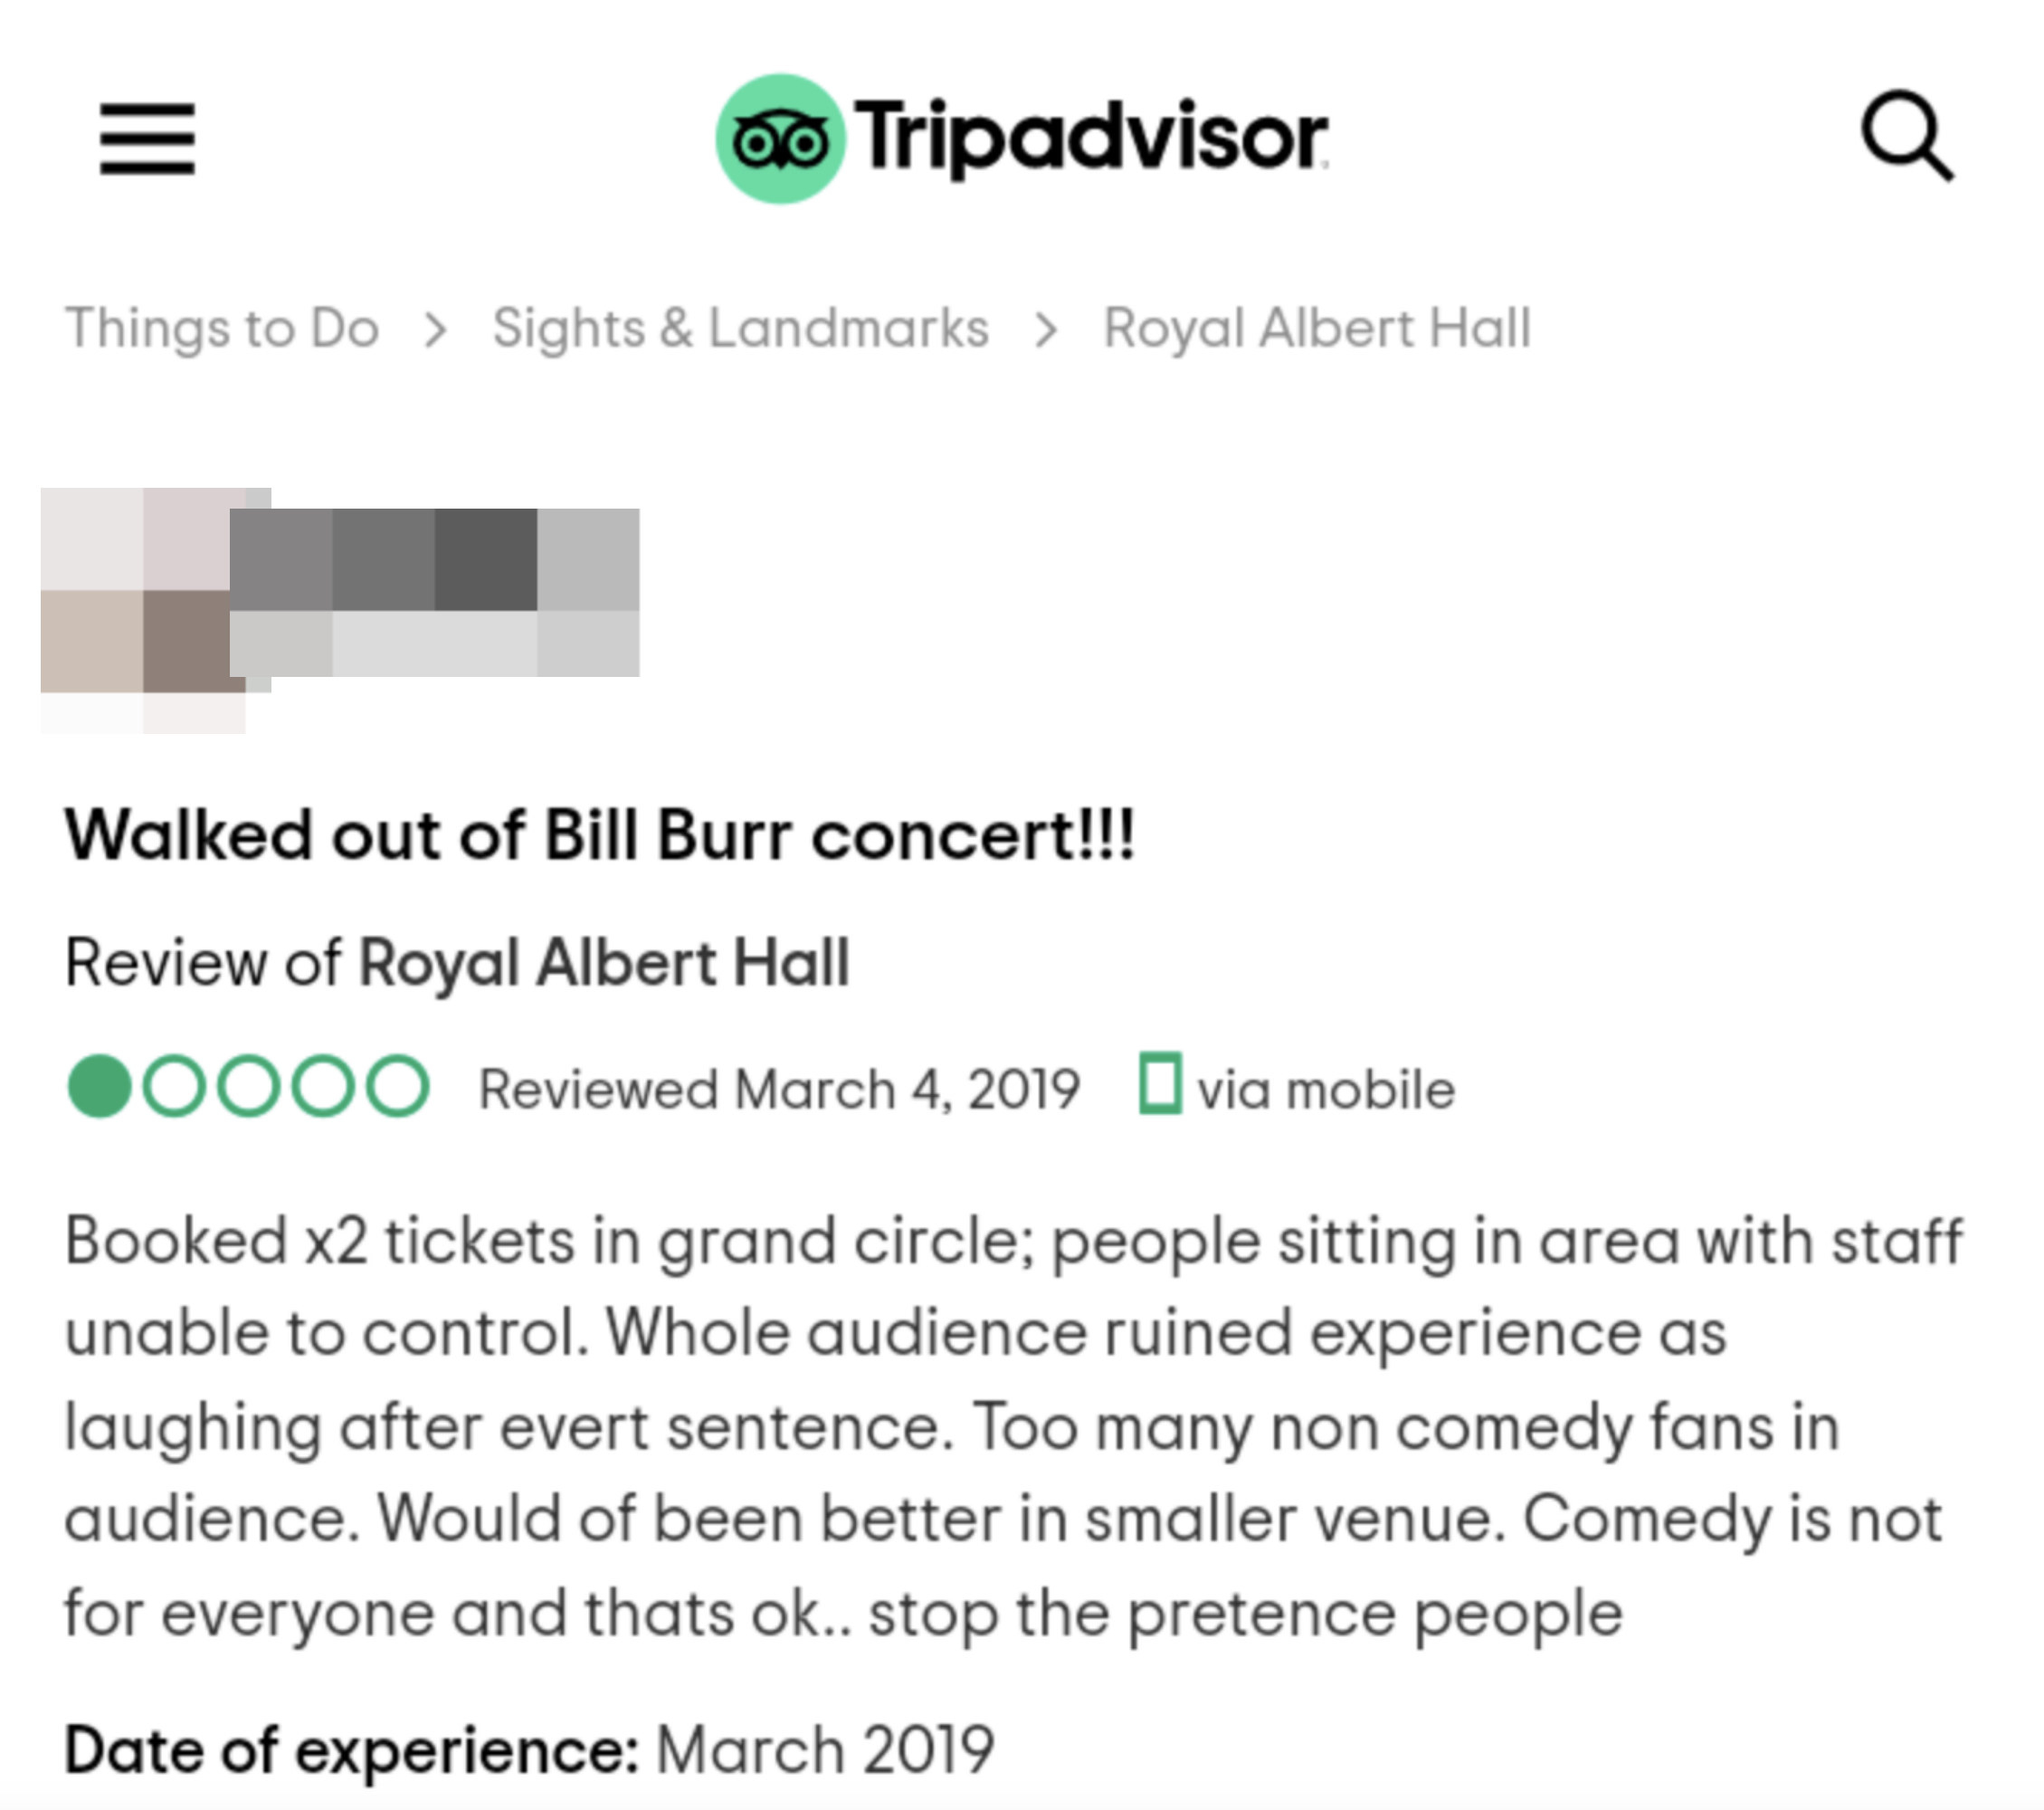 A one-star review for a comedy show that says the audience ruined the experience because they were laughing after every sentence